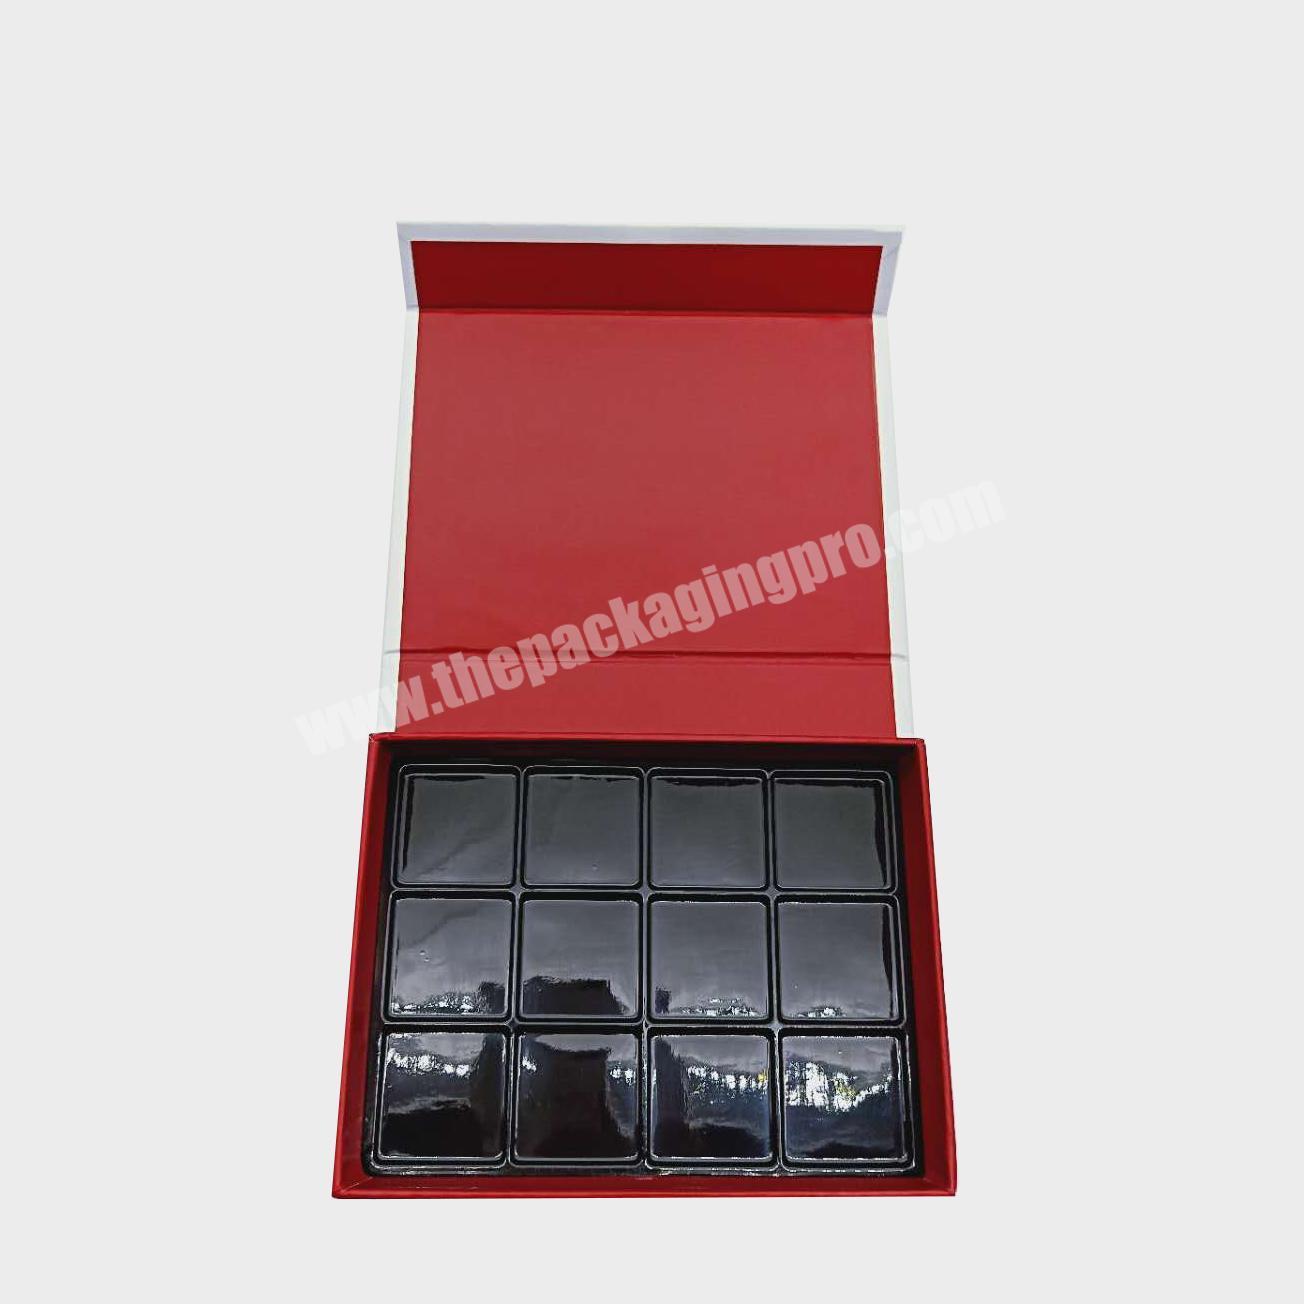 Rigid gift book shape magnetic red gift box packaging manufacturers in china